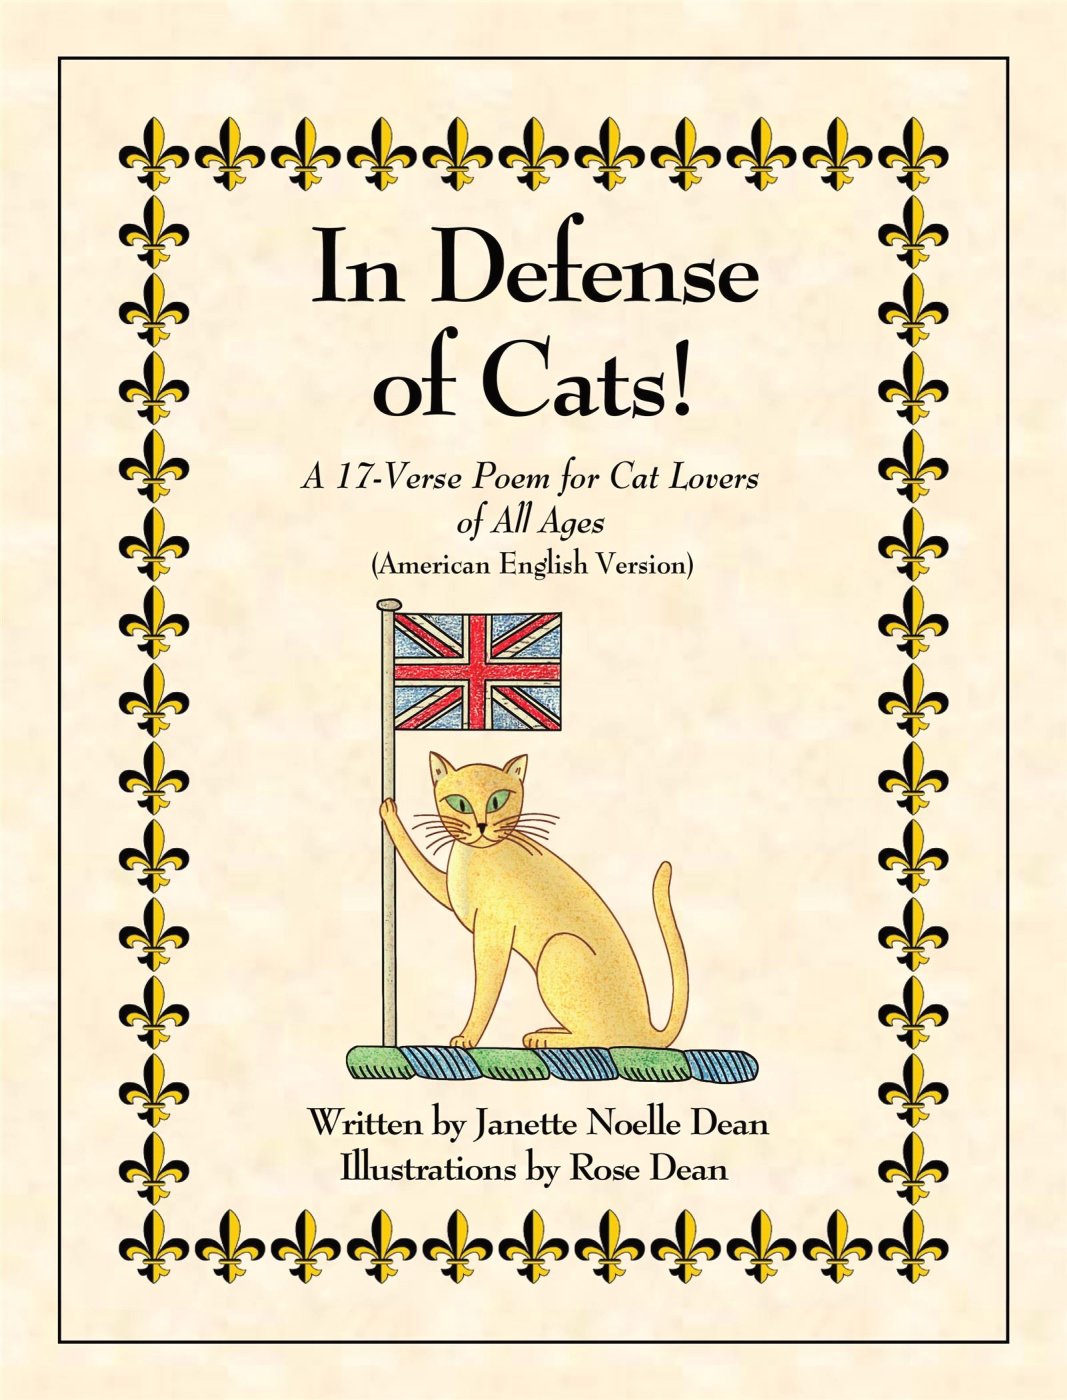 The brand new cat book about cats called In Defense of Cats! is for cat lovers of all ages and features the English cat Sir William, a cat defender and proponent, named in honor of William Shakespeare. See more at http://www.indefenseofcats.com